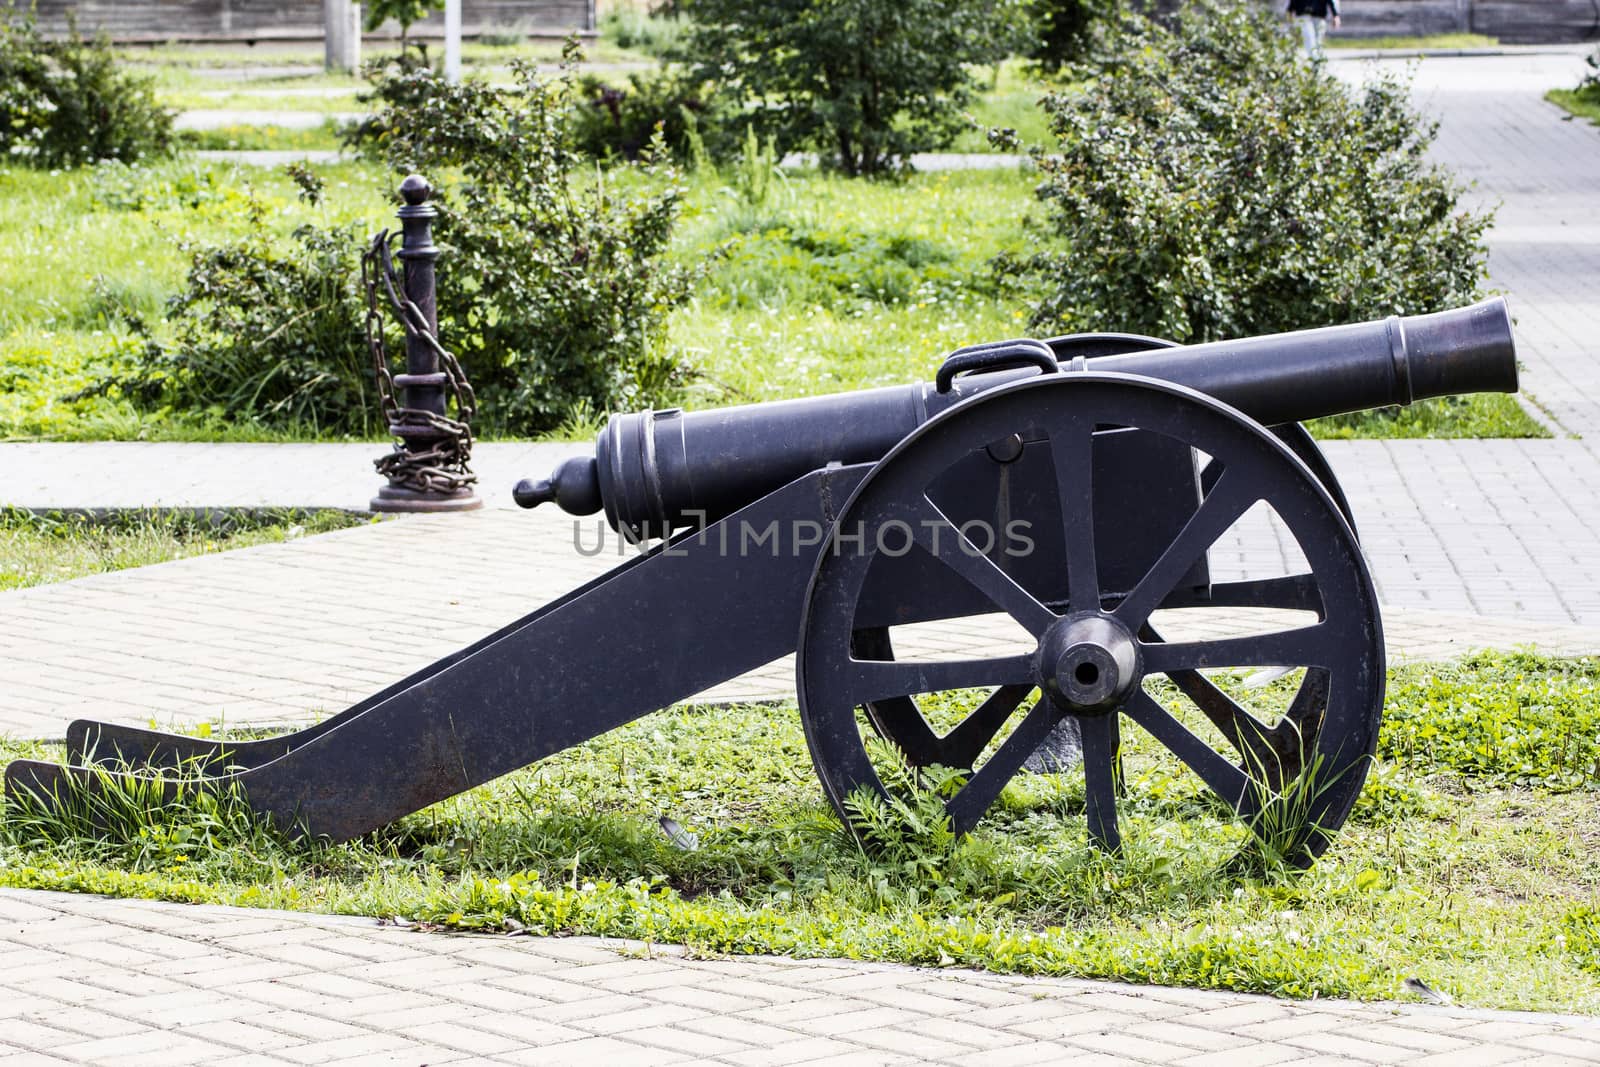 Cannon shooting nuclei of the late eighteenth century on the background of the Bush.